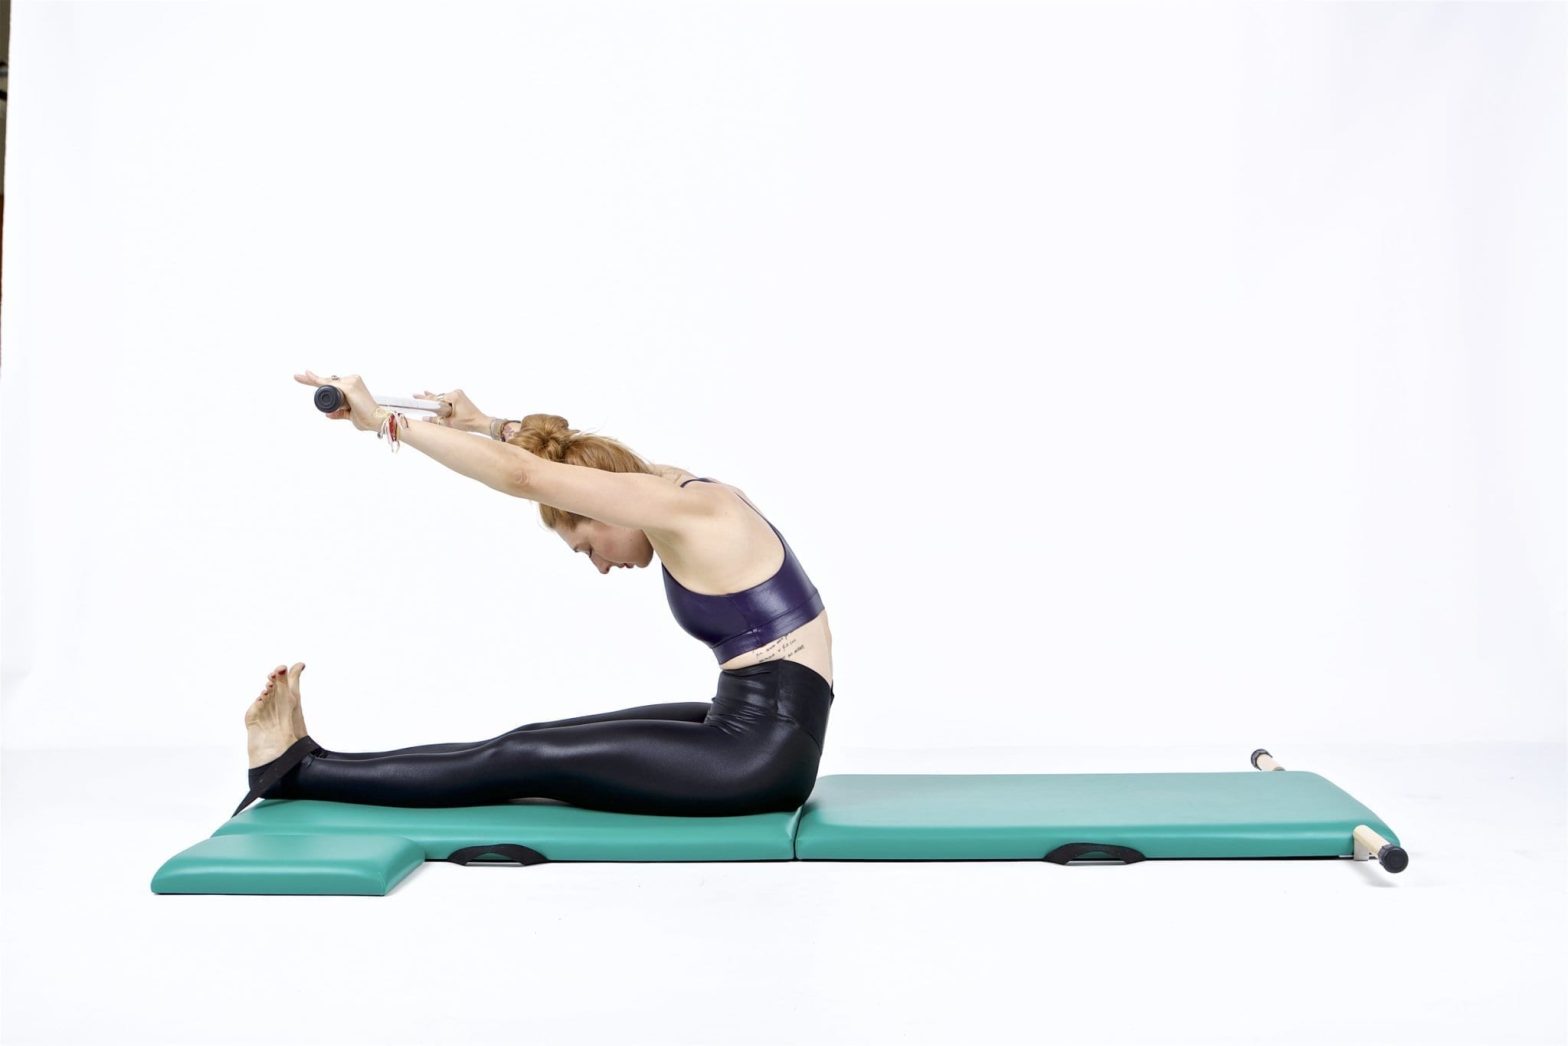 Roll Up on the Mat - Online Pilates Classes